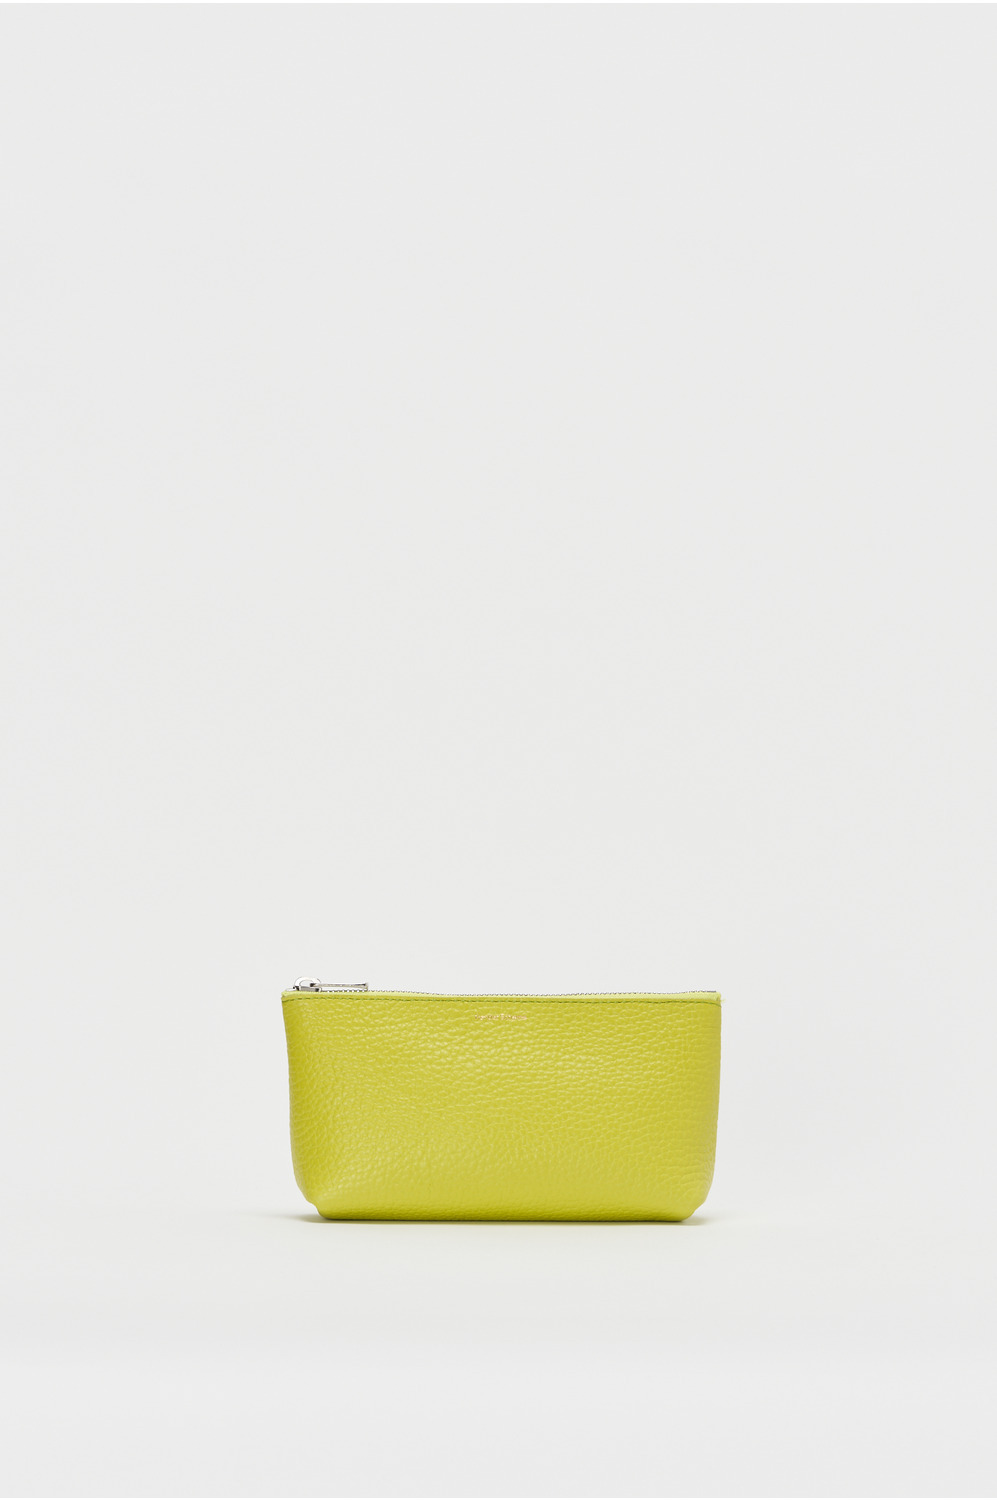 pouch S 詳細画像 lime green 1